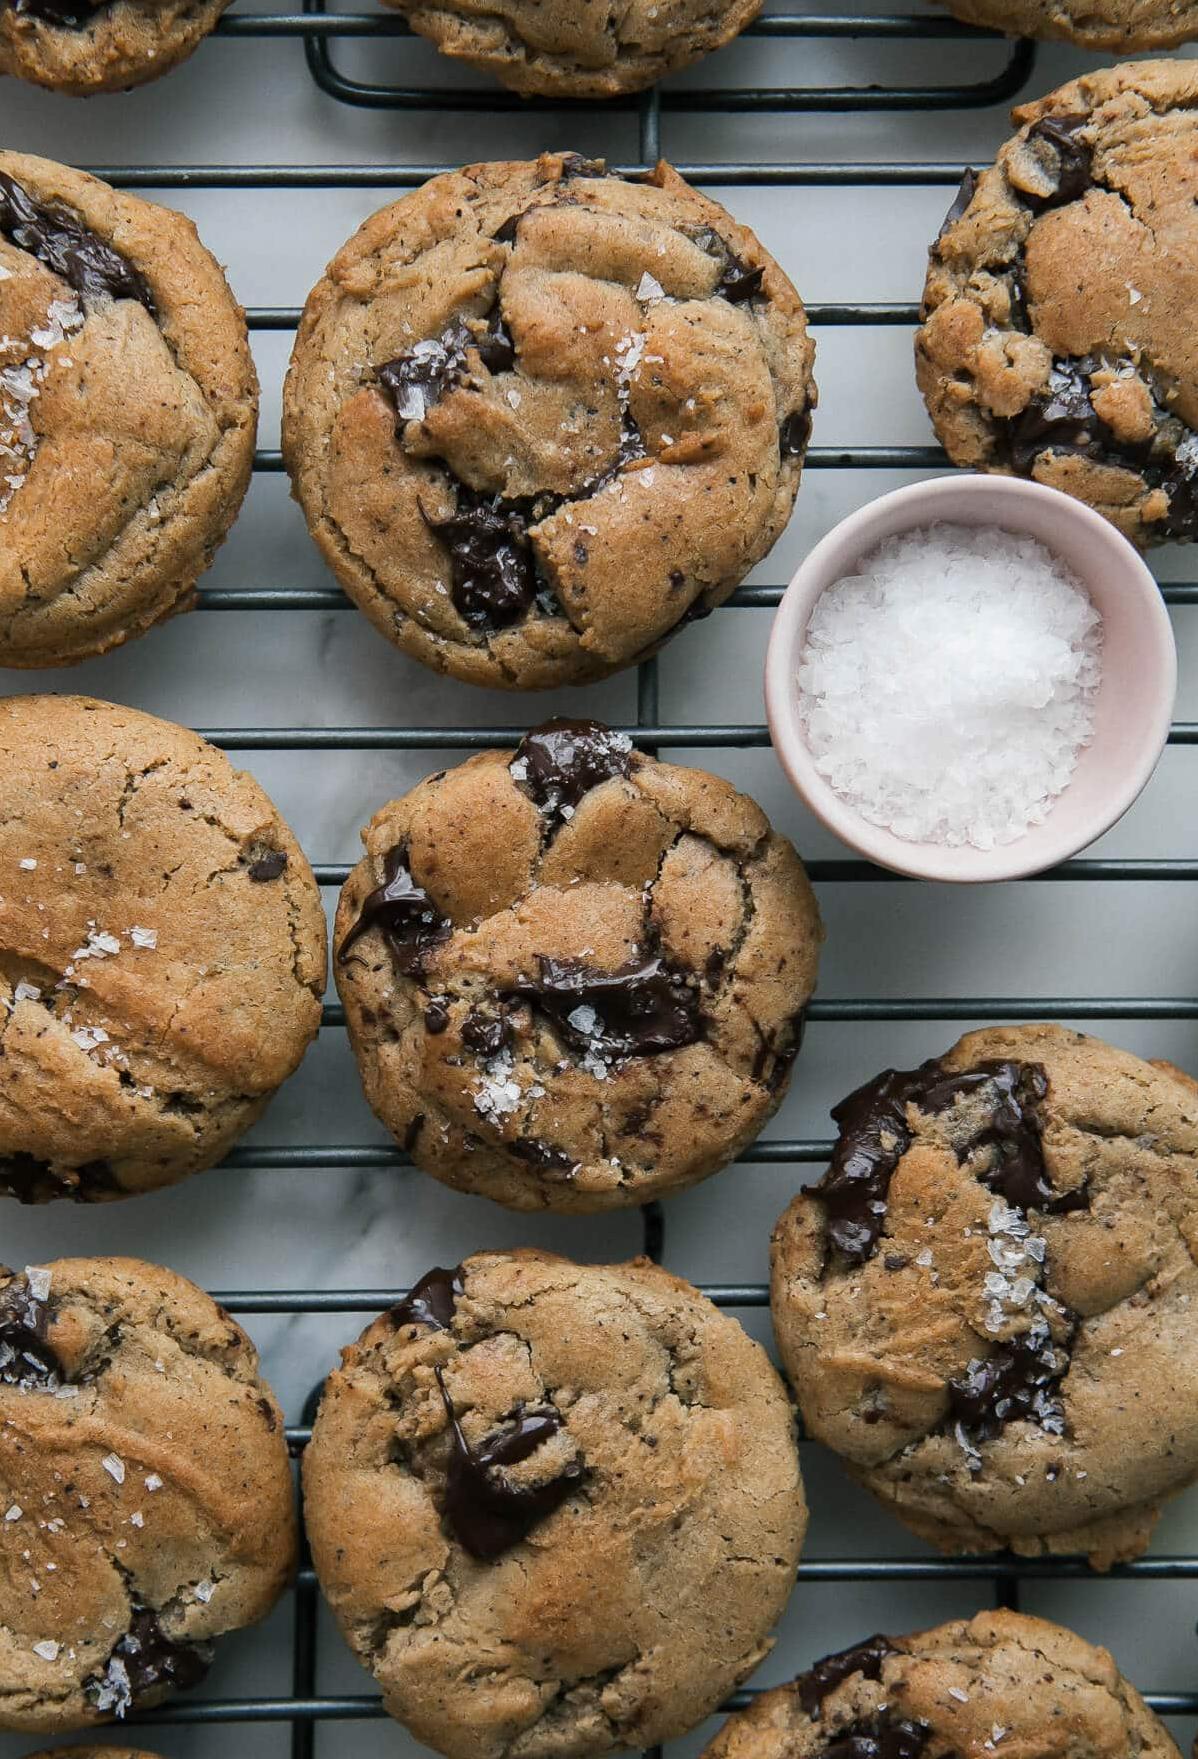  The ultimate indulgence: Espresso Chocolate Chip Cookies